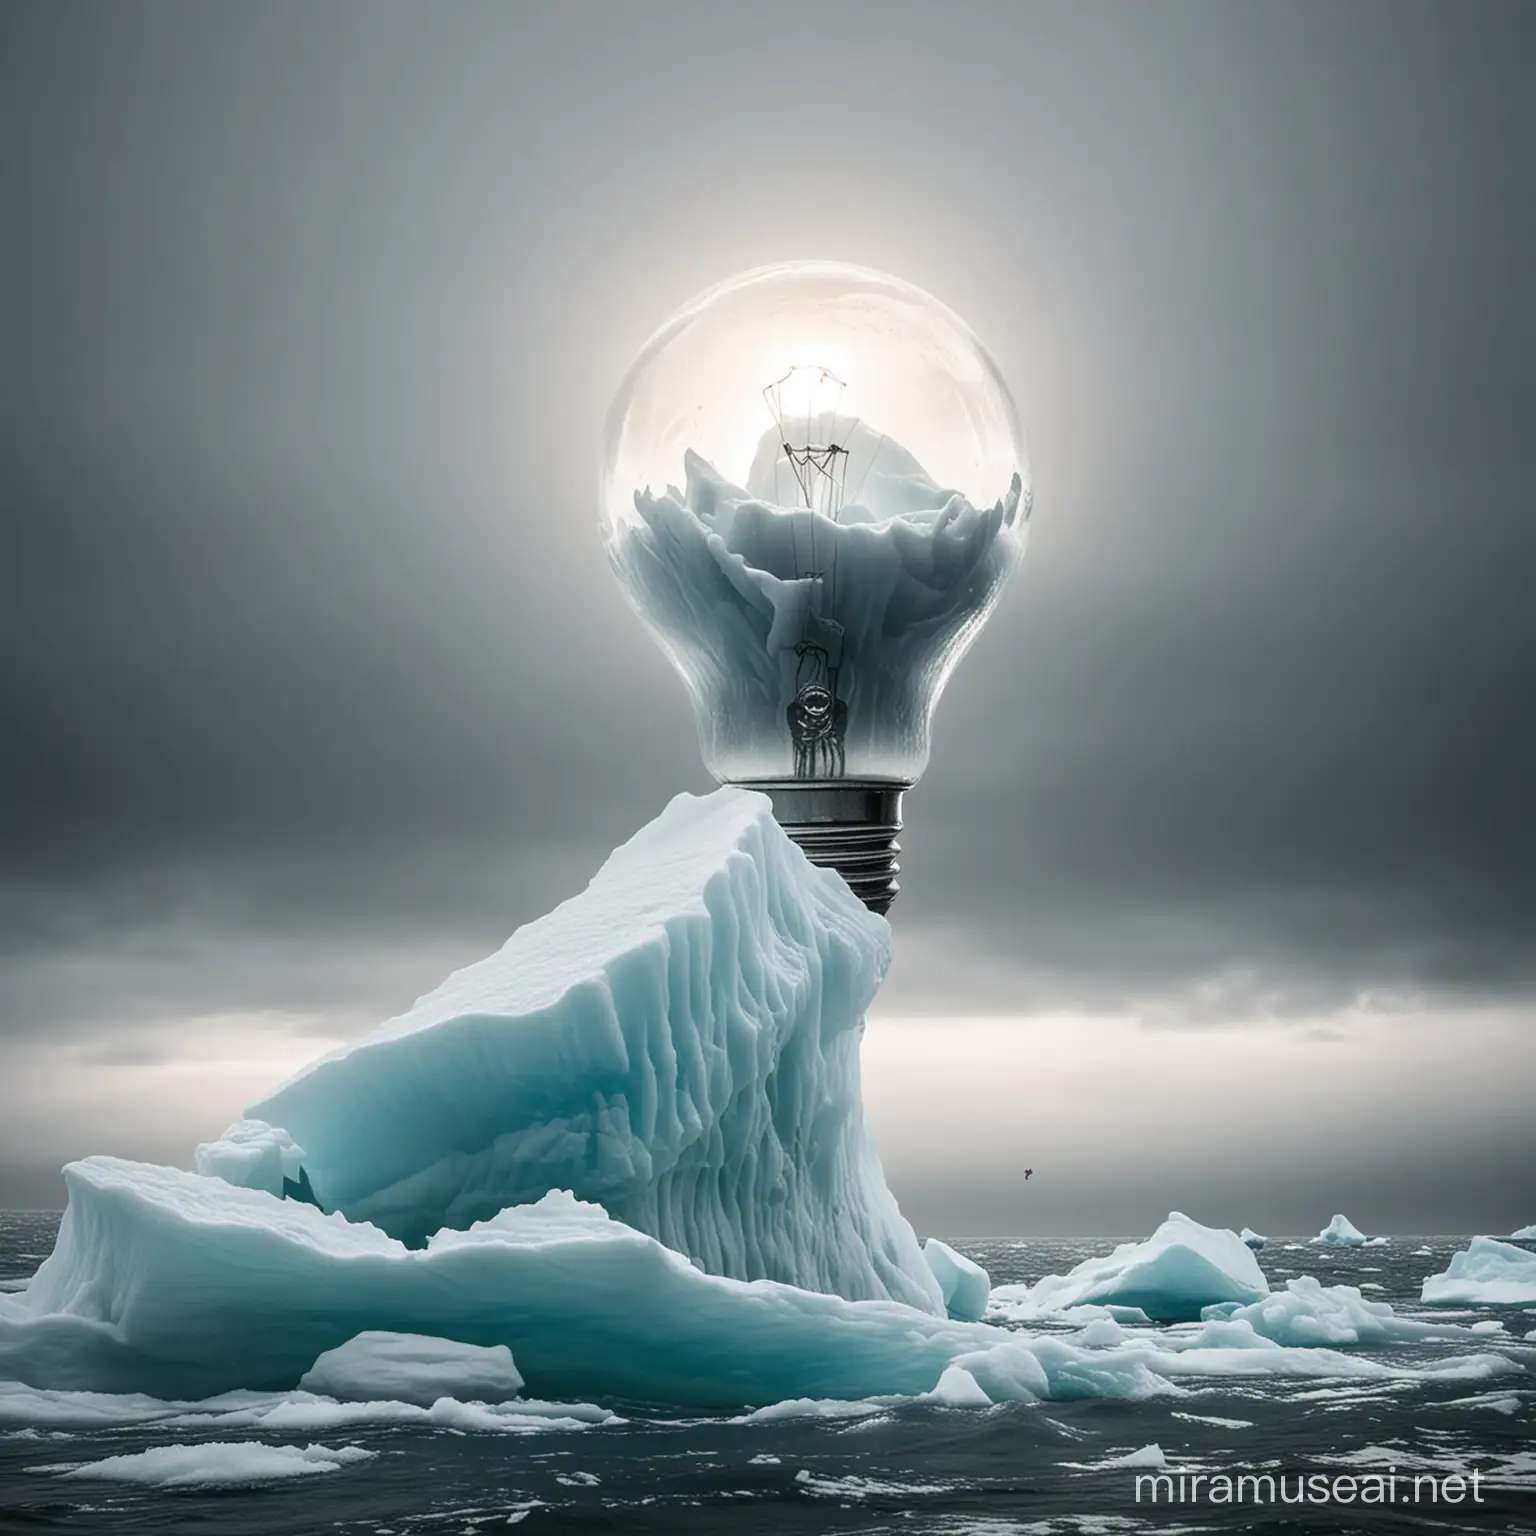 Creative Light Bulb Colliding with Iceberg Inspiring Collision of Nature and Imagination